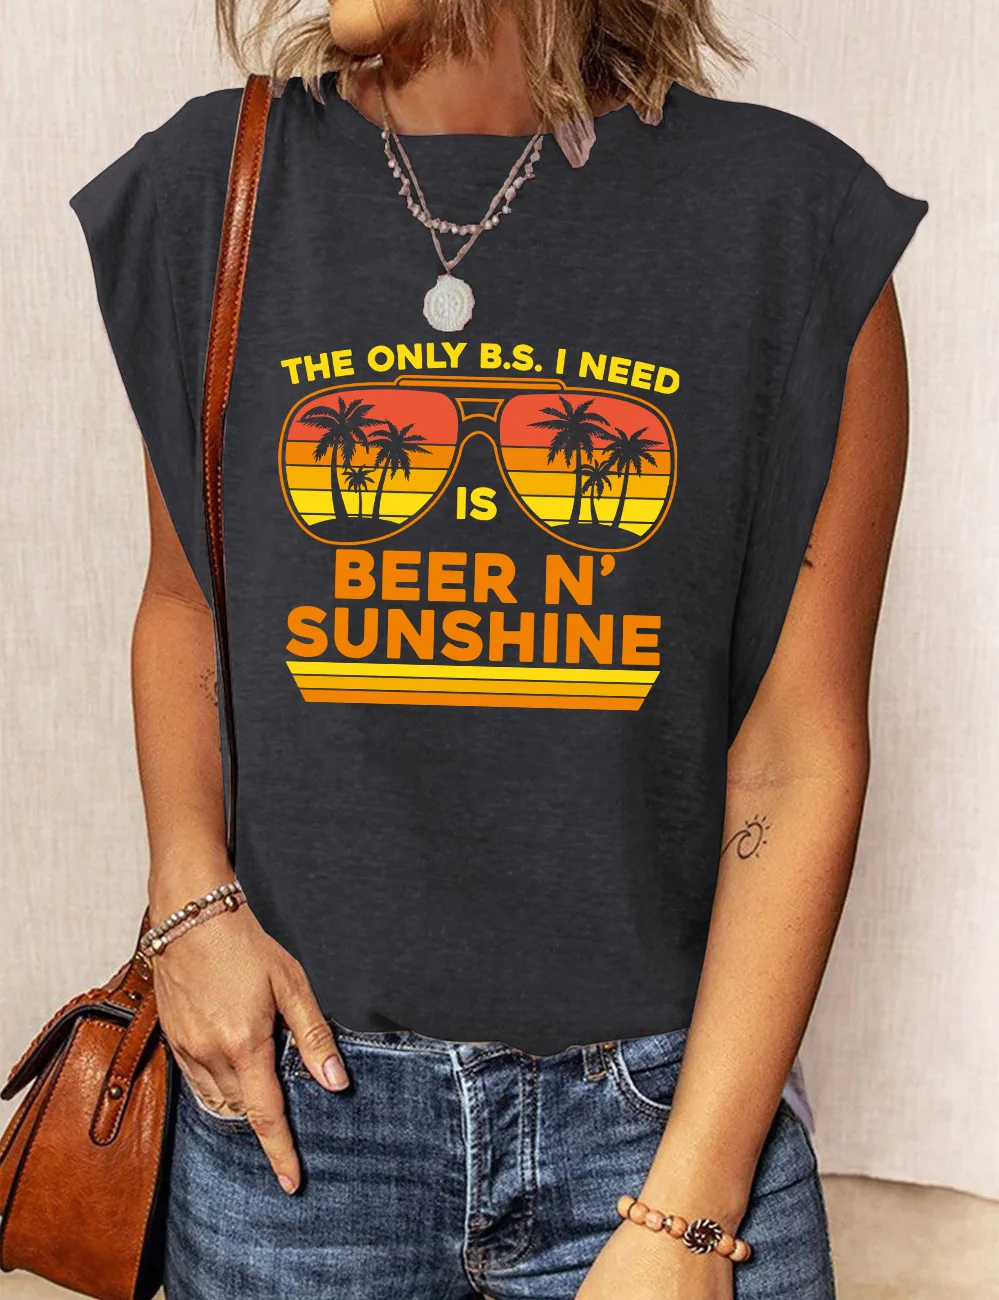 The Only B.S I Need Is Beer And Sunshine T-Shirt